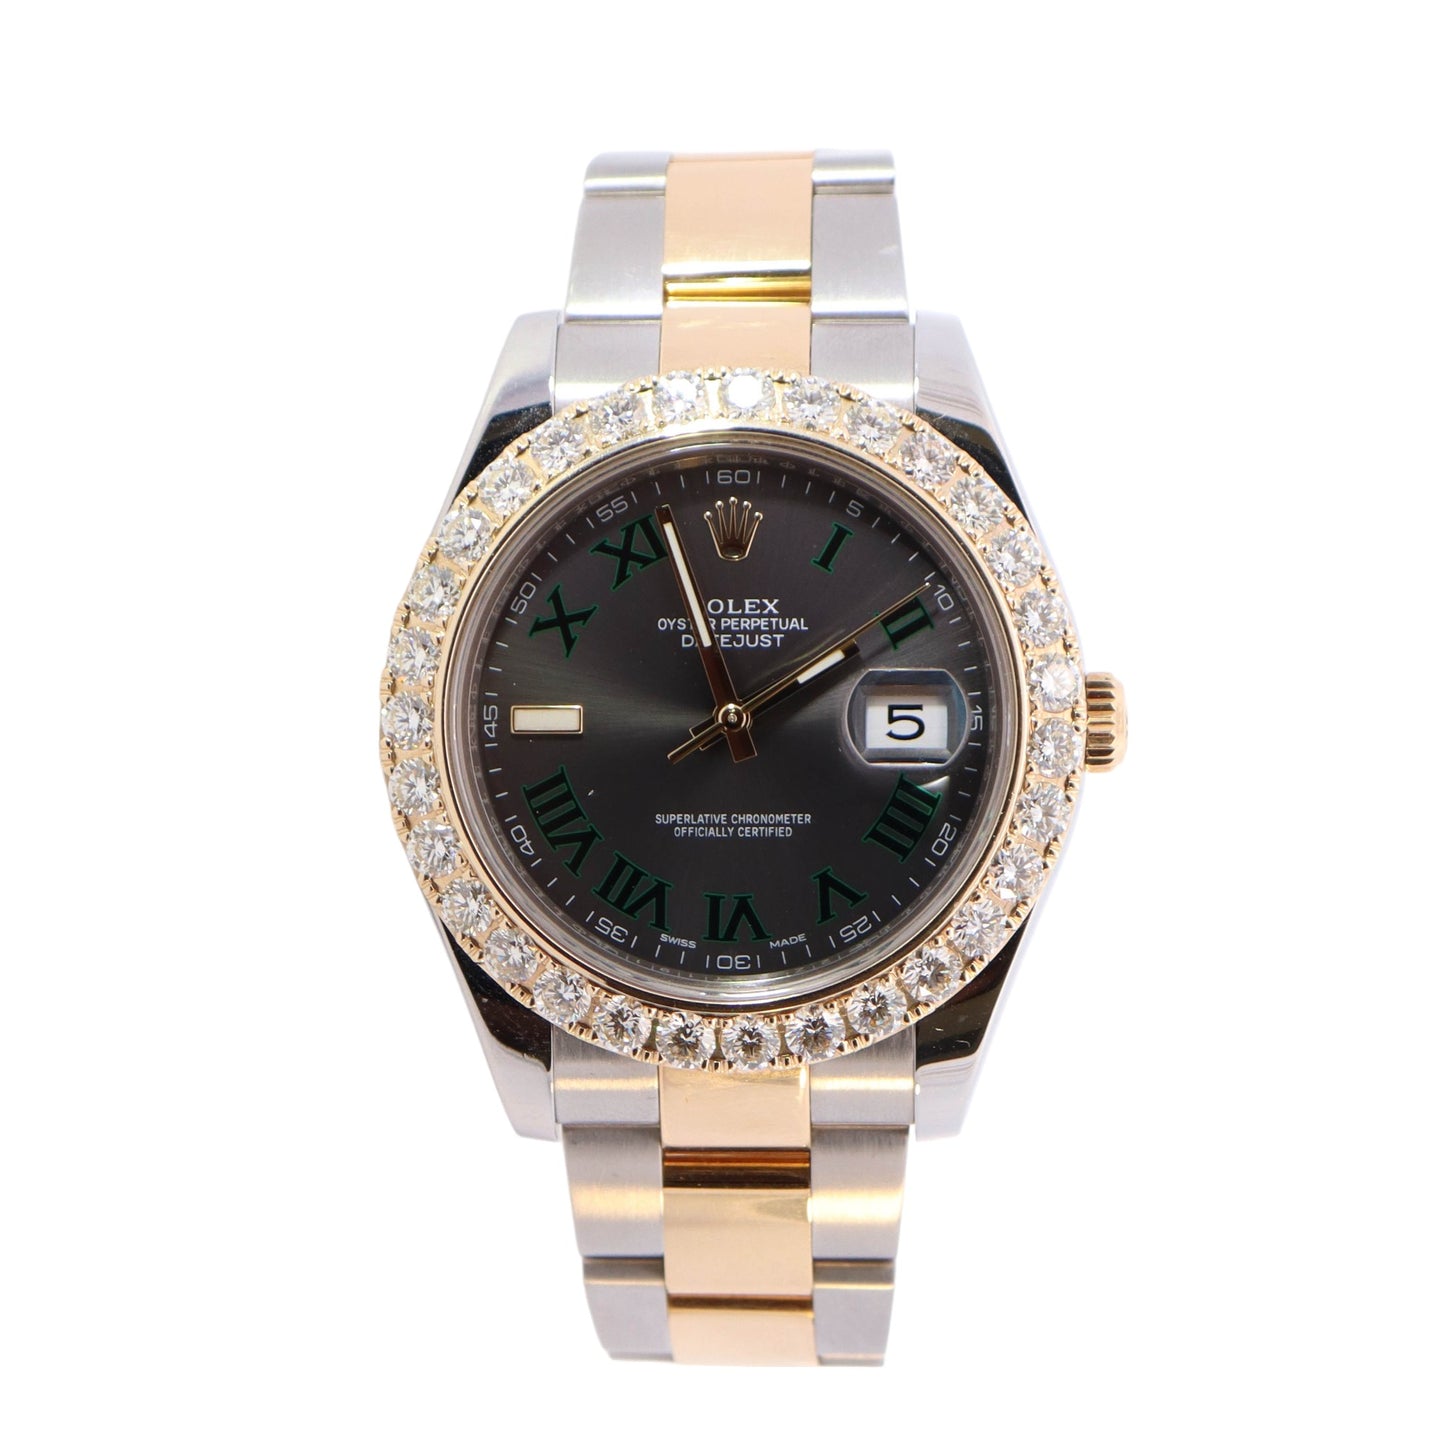 Rolex Datejust II Two-Tone Stainless Steel & Yellow Gold 41mm Wimbledon Roman Dial Watch   Reference #: 116333